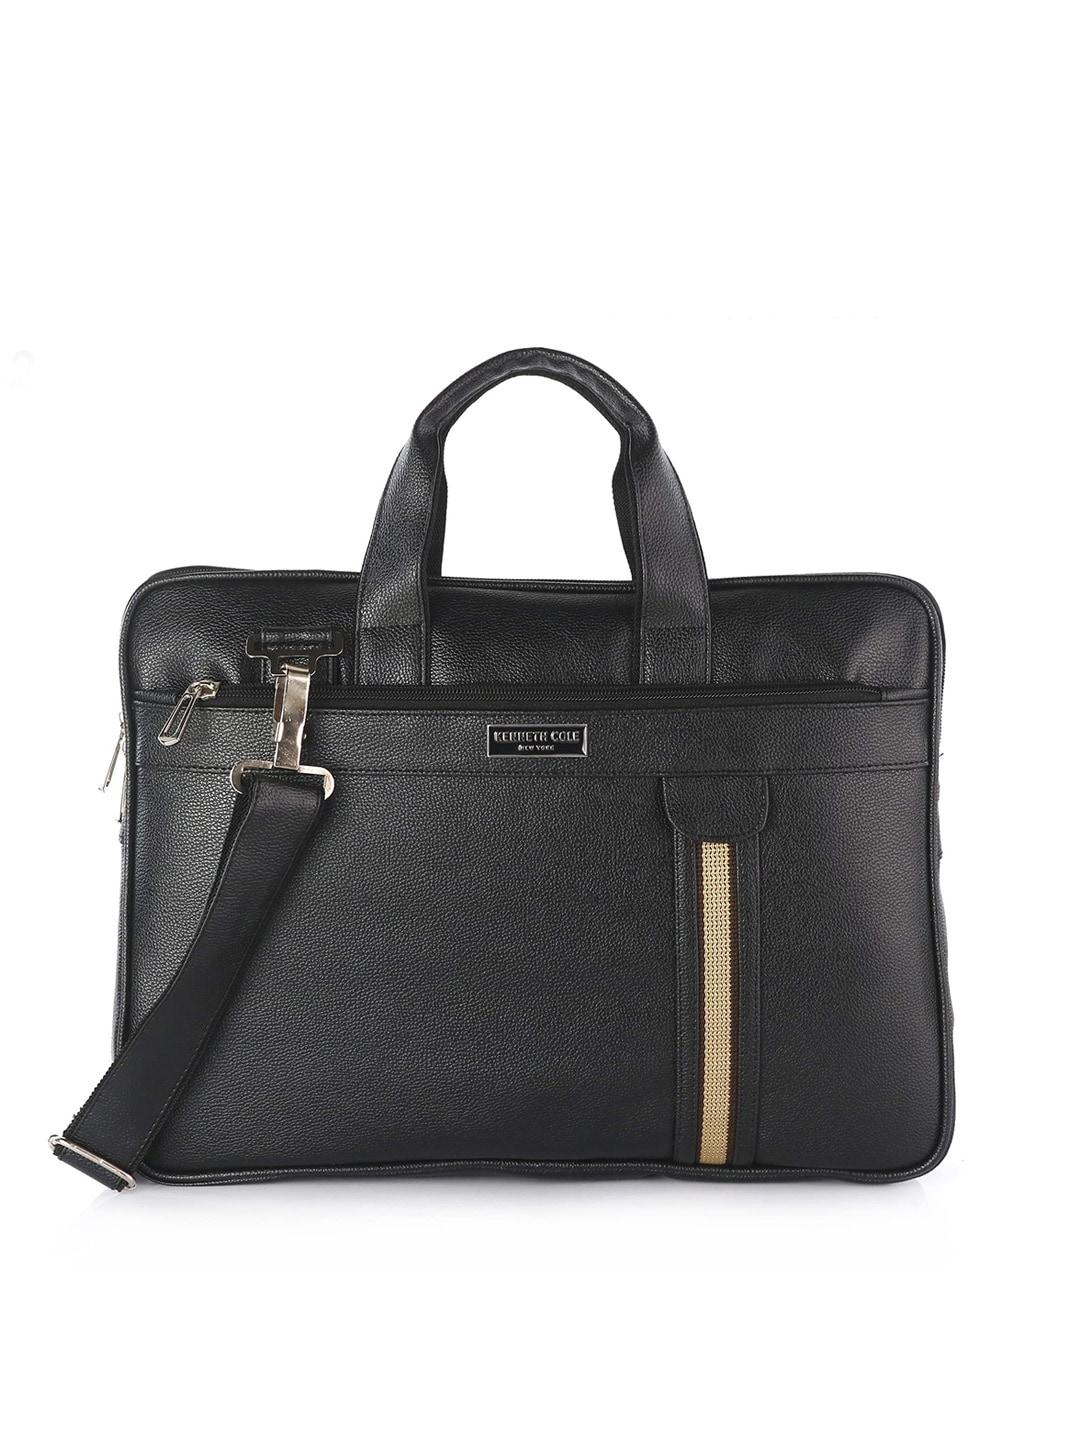 Kenneth Cole Textured Laptop Bag